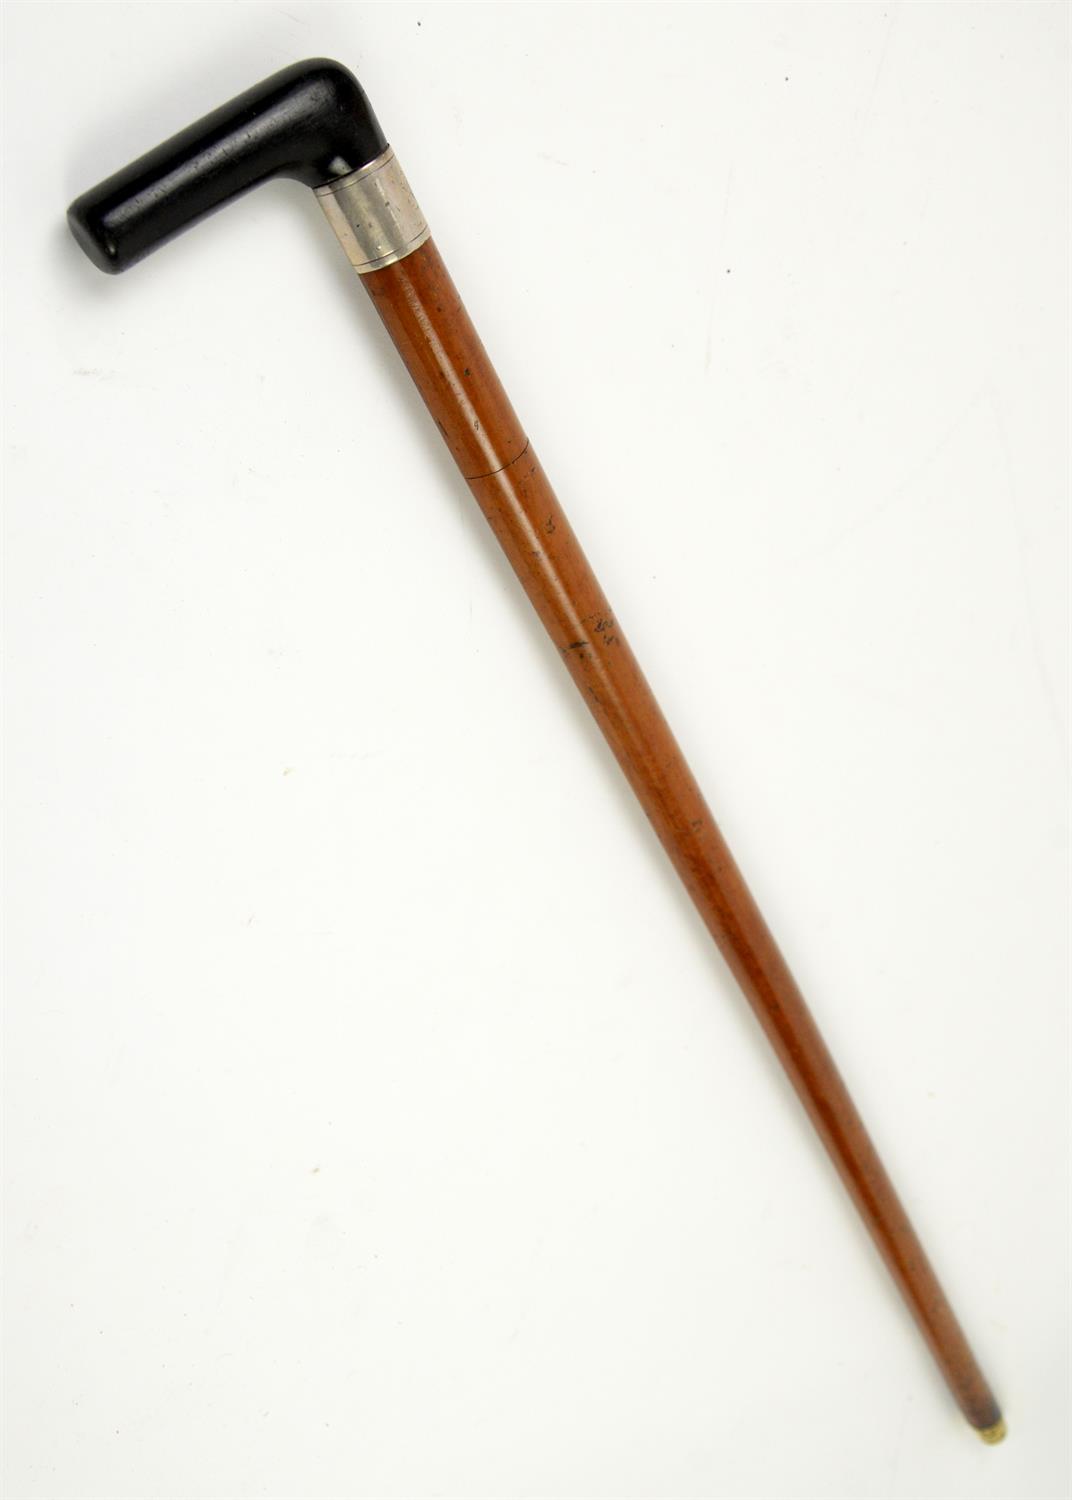 Late 19th century malacca swordstick with ebony handle and white metal mount, 84.5cm long,